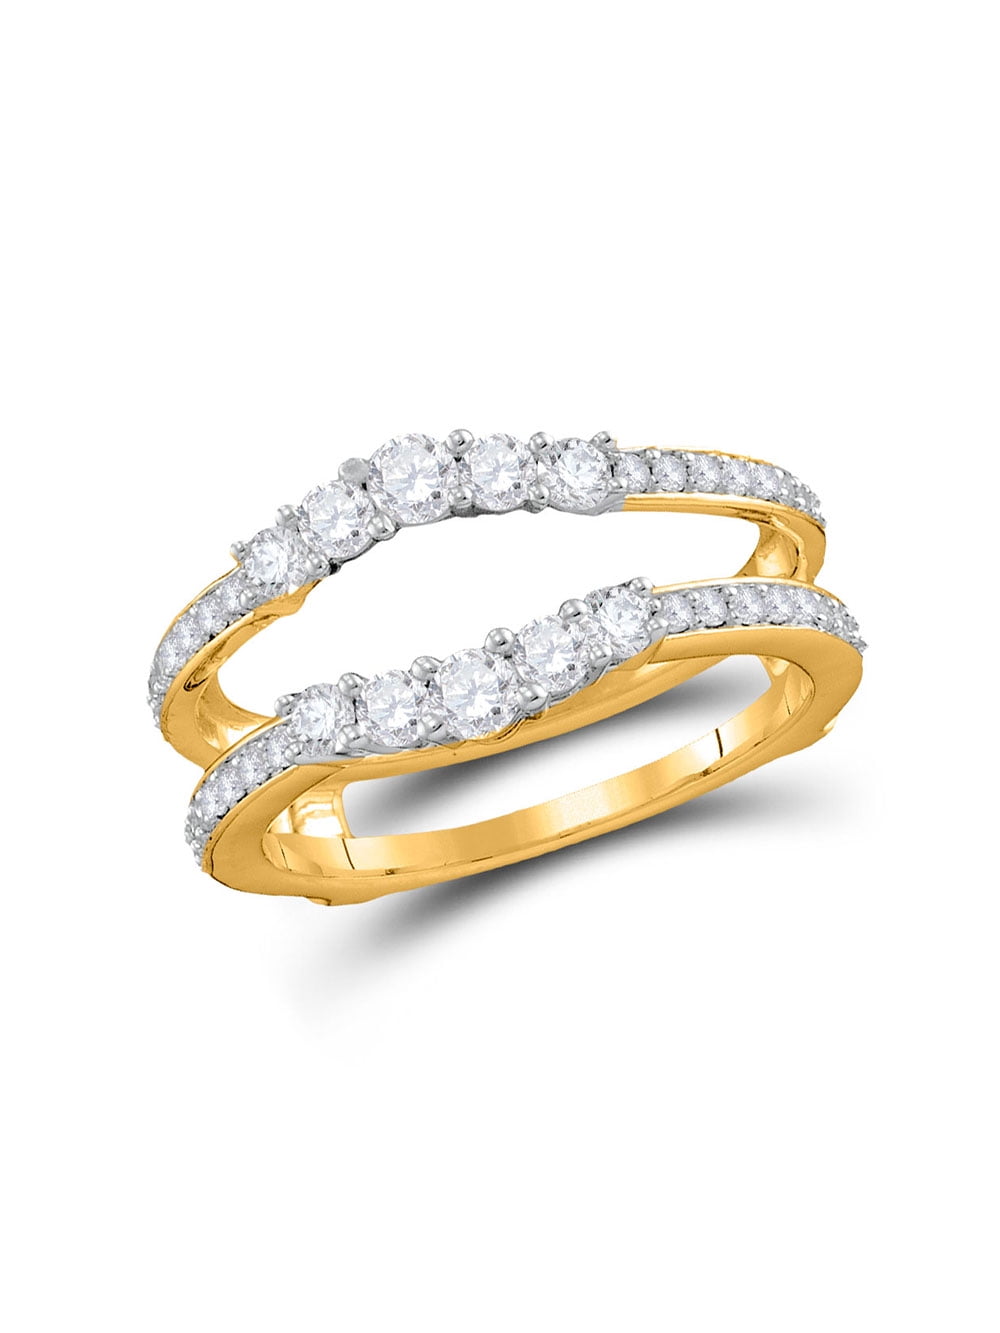 White & Yellow Gold Filled Ring Guards - Findings Outlet